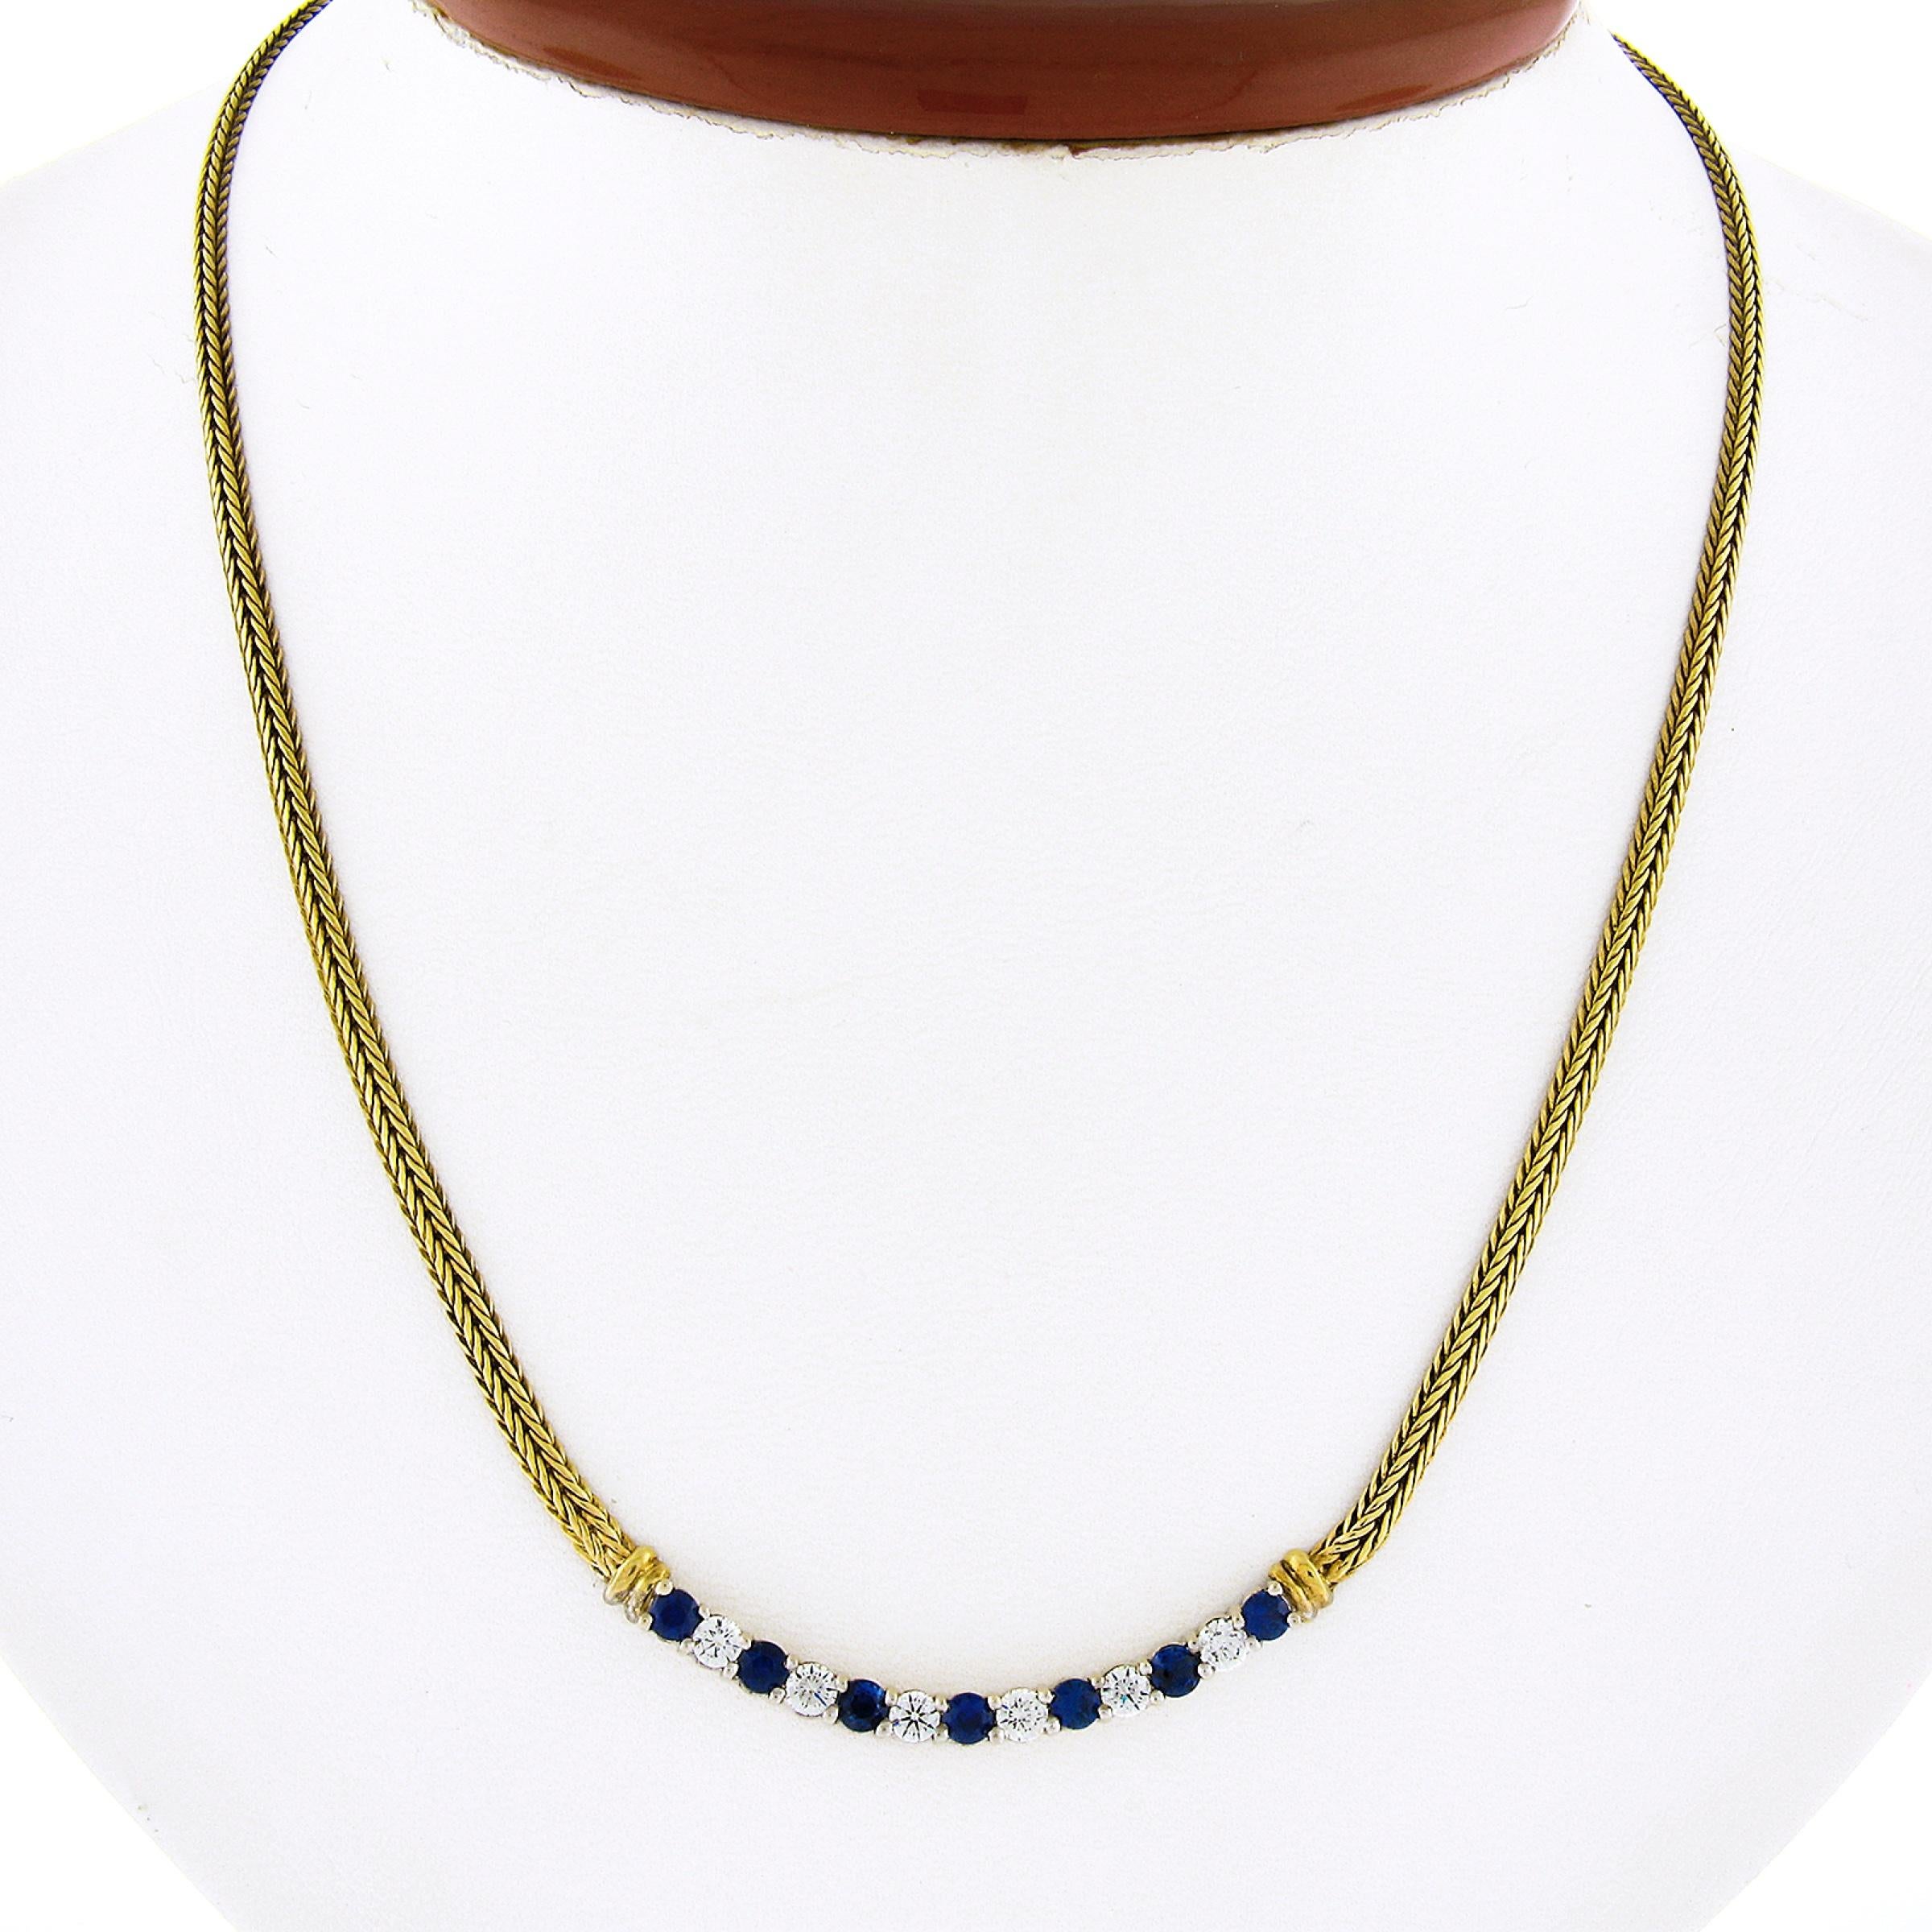 This stunning vintage necklace was well crafted from solid 18k yellow gold and features wide, flat, wheat link chain that leads to an 18k white gold centerpiece that is set with TOP QUALITY sapphires and diamonds throughout. This slightly curved